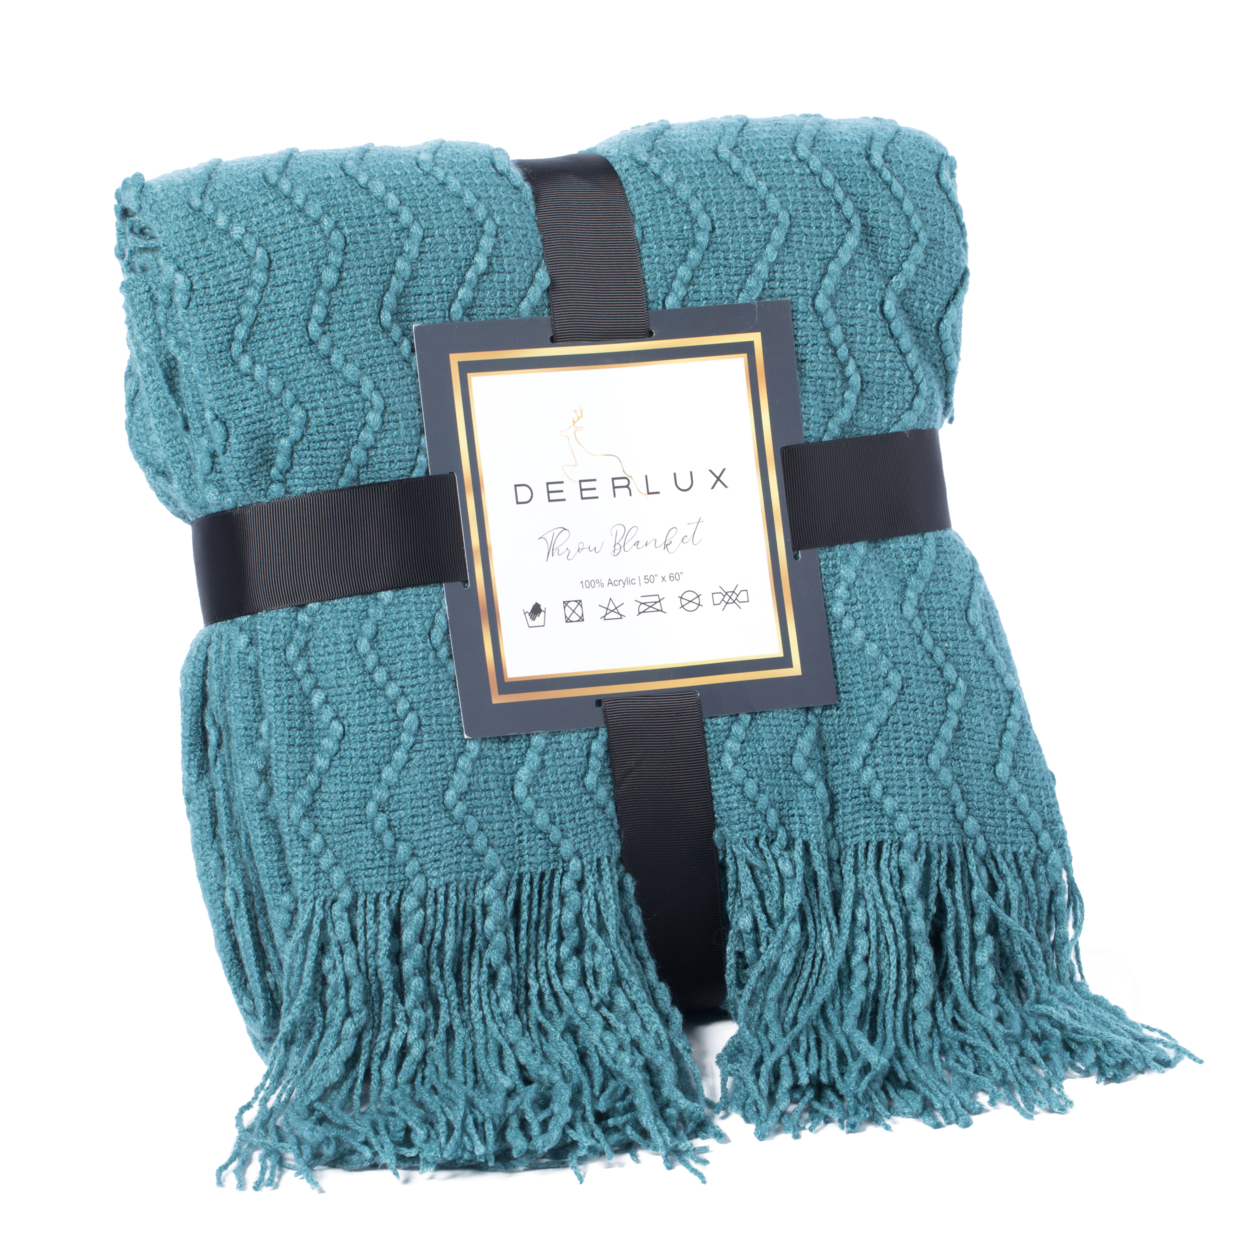 Decorative Throw Blanket - 50x60in Soft Knit With Delightful Fringe Edges For A Sophisticated And Cozy Touch To Your Living Space Lightwe -